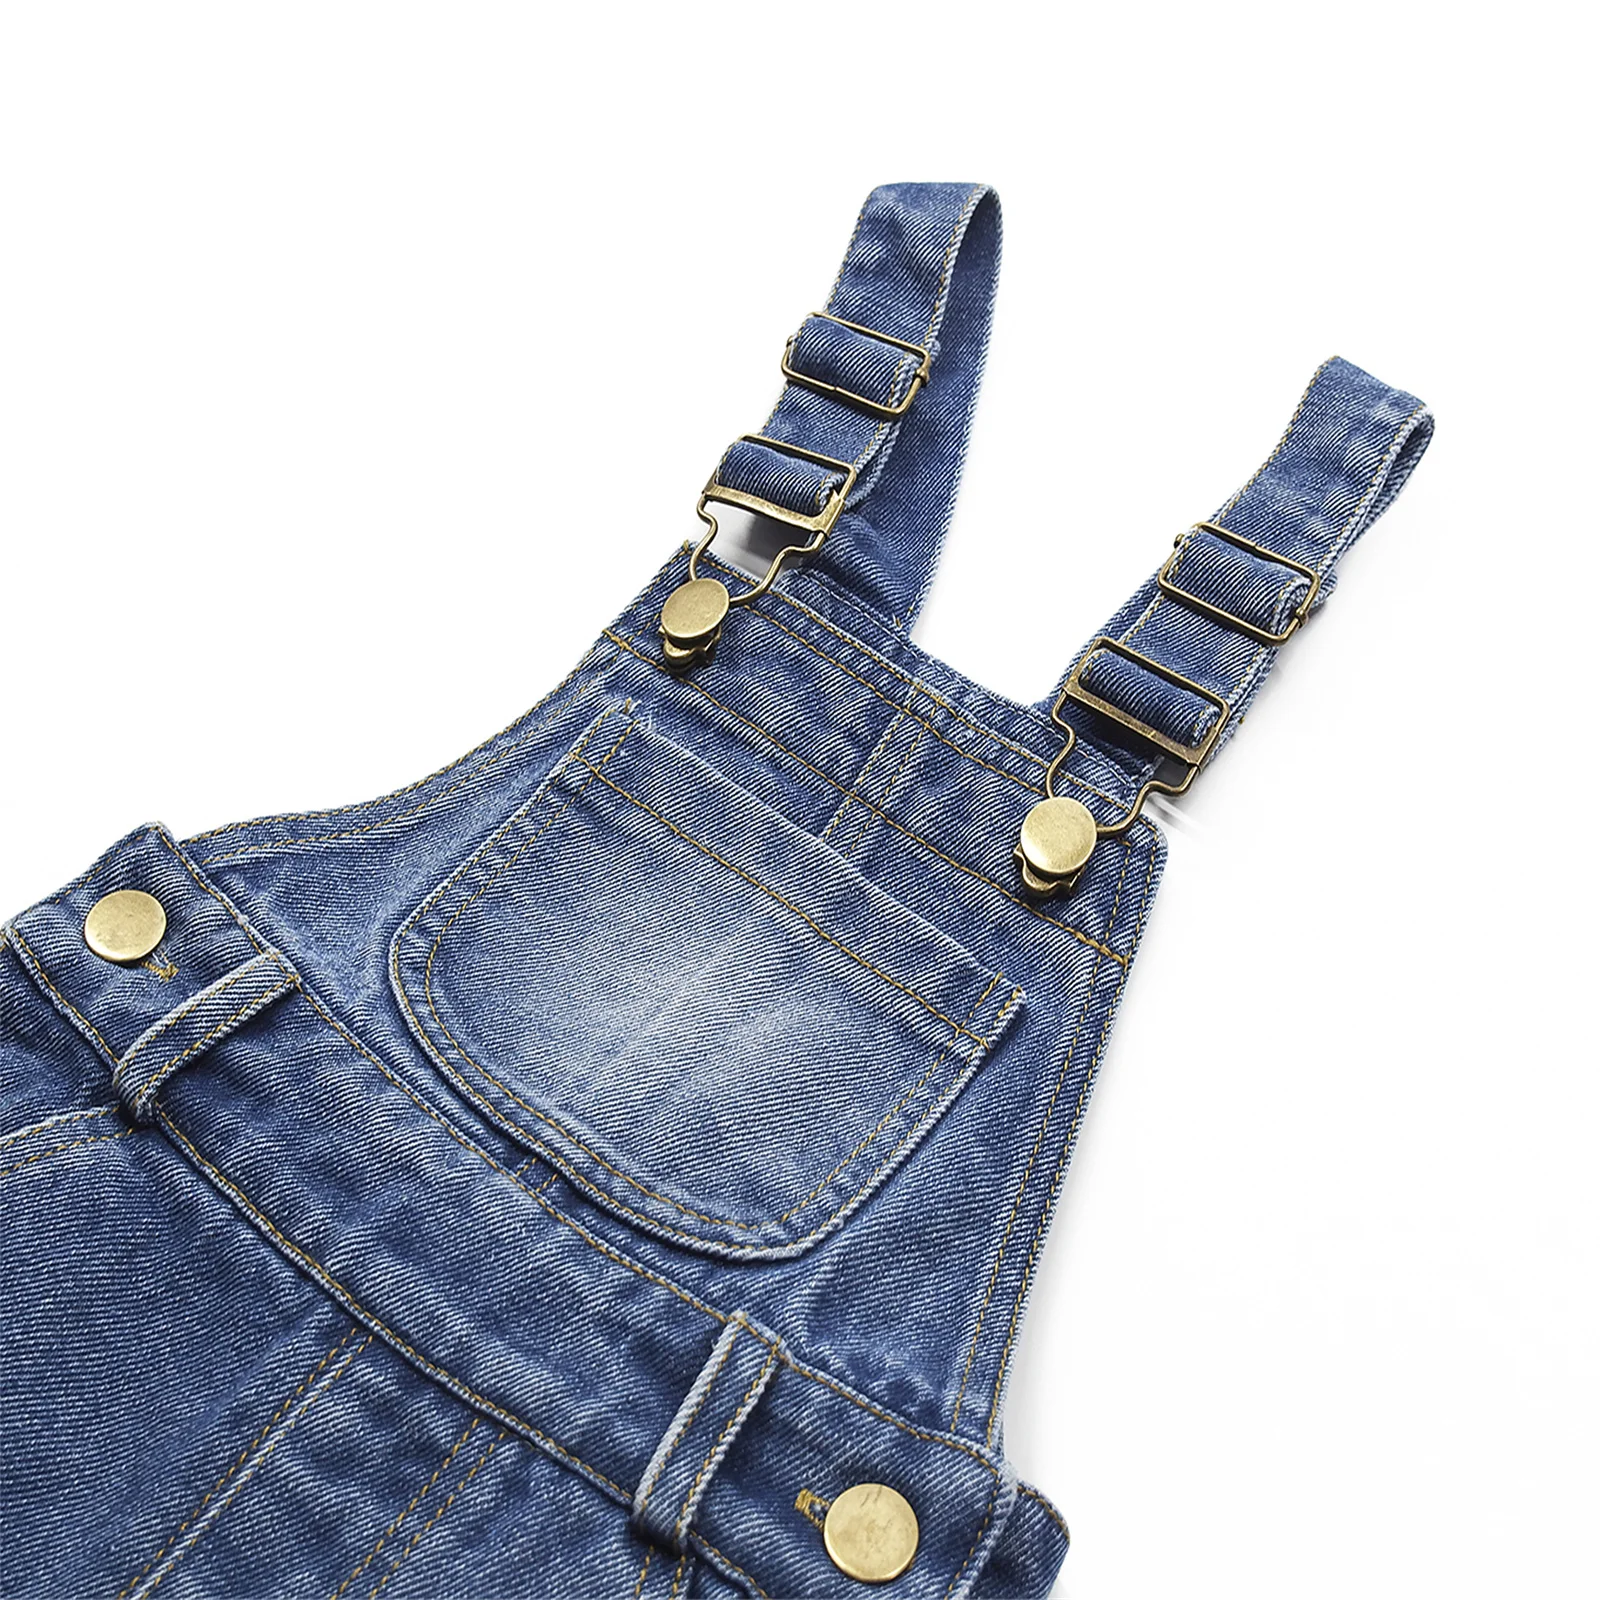 KIDSCOOL SPACE Baby Toddler 2 Buttons Adjustable Straps Fashion Jean Overall 